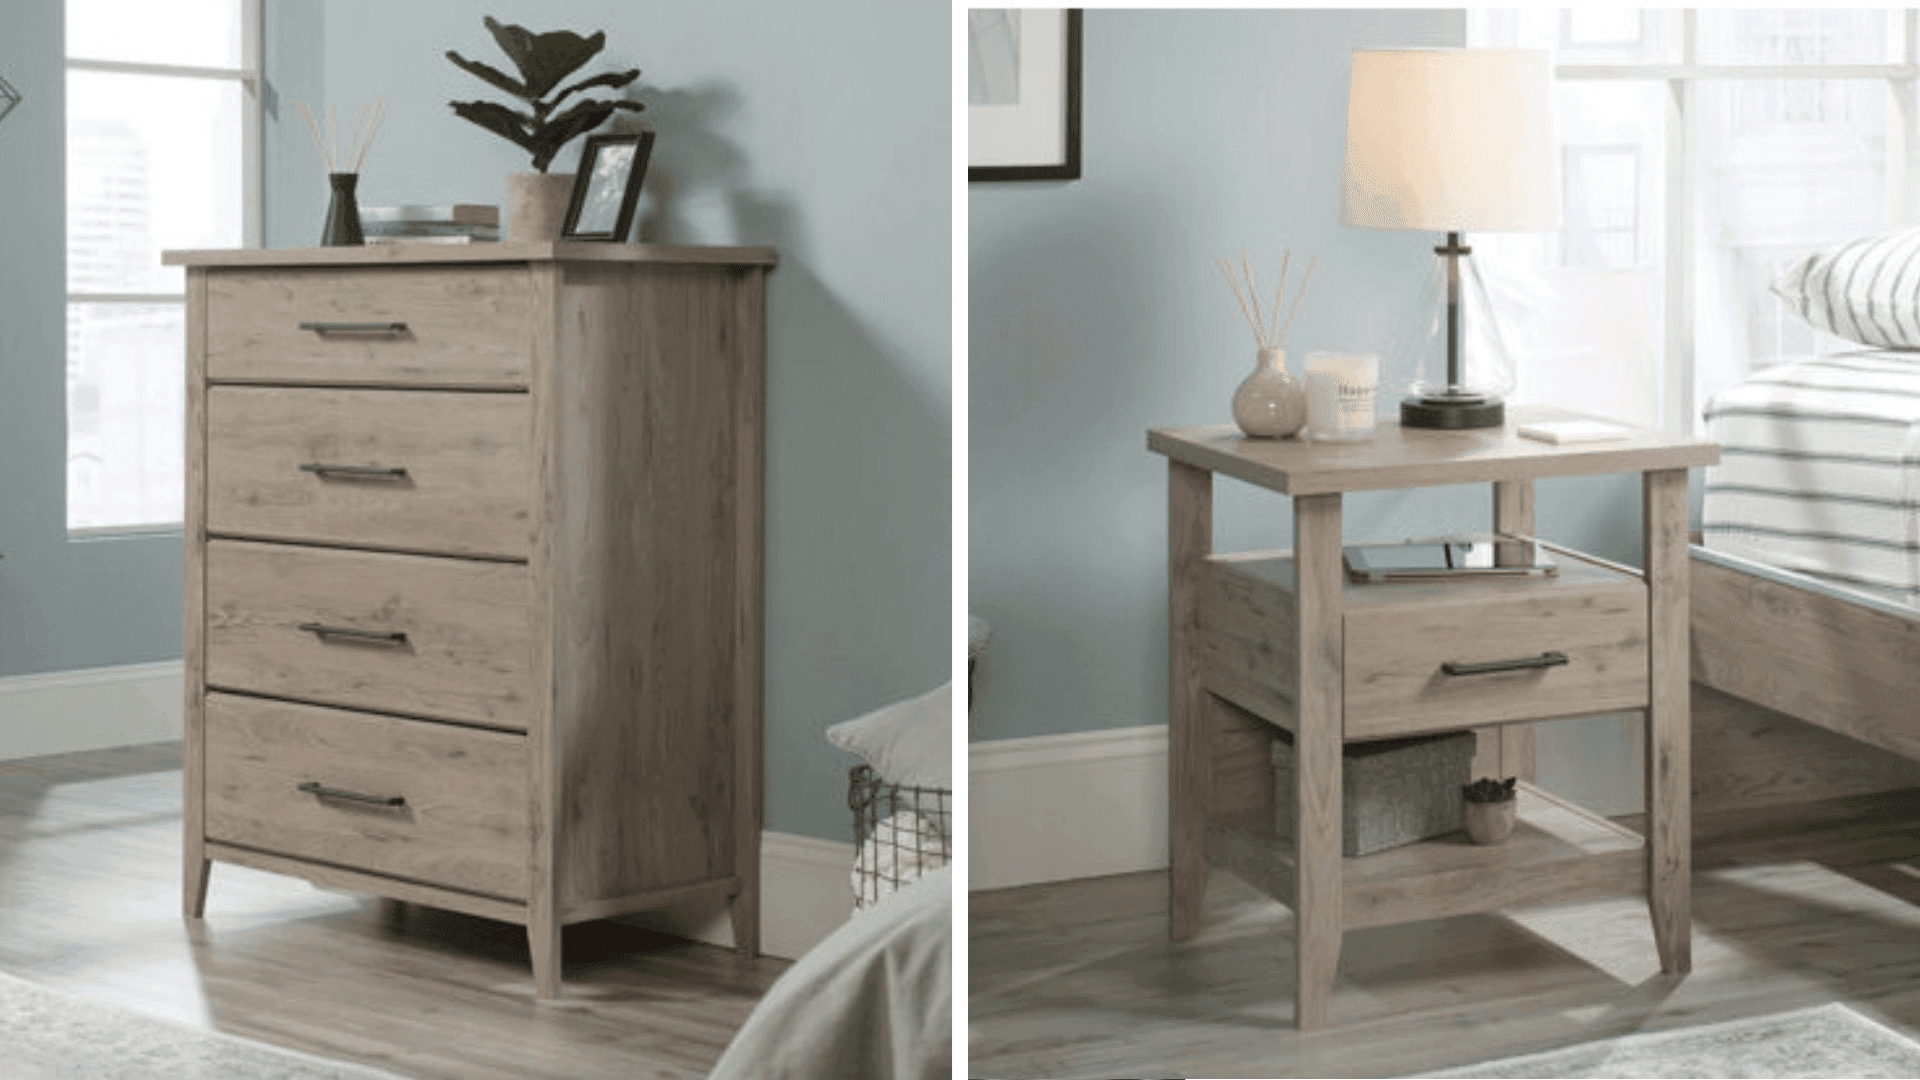 A light wooden chest with rod handles and four drawers on the left and a nightstand with one drawer on the right.